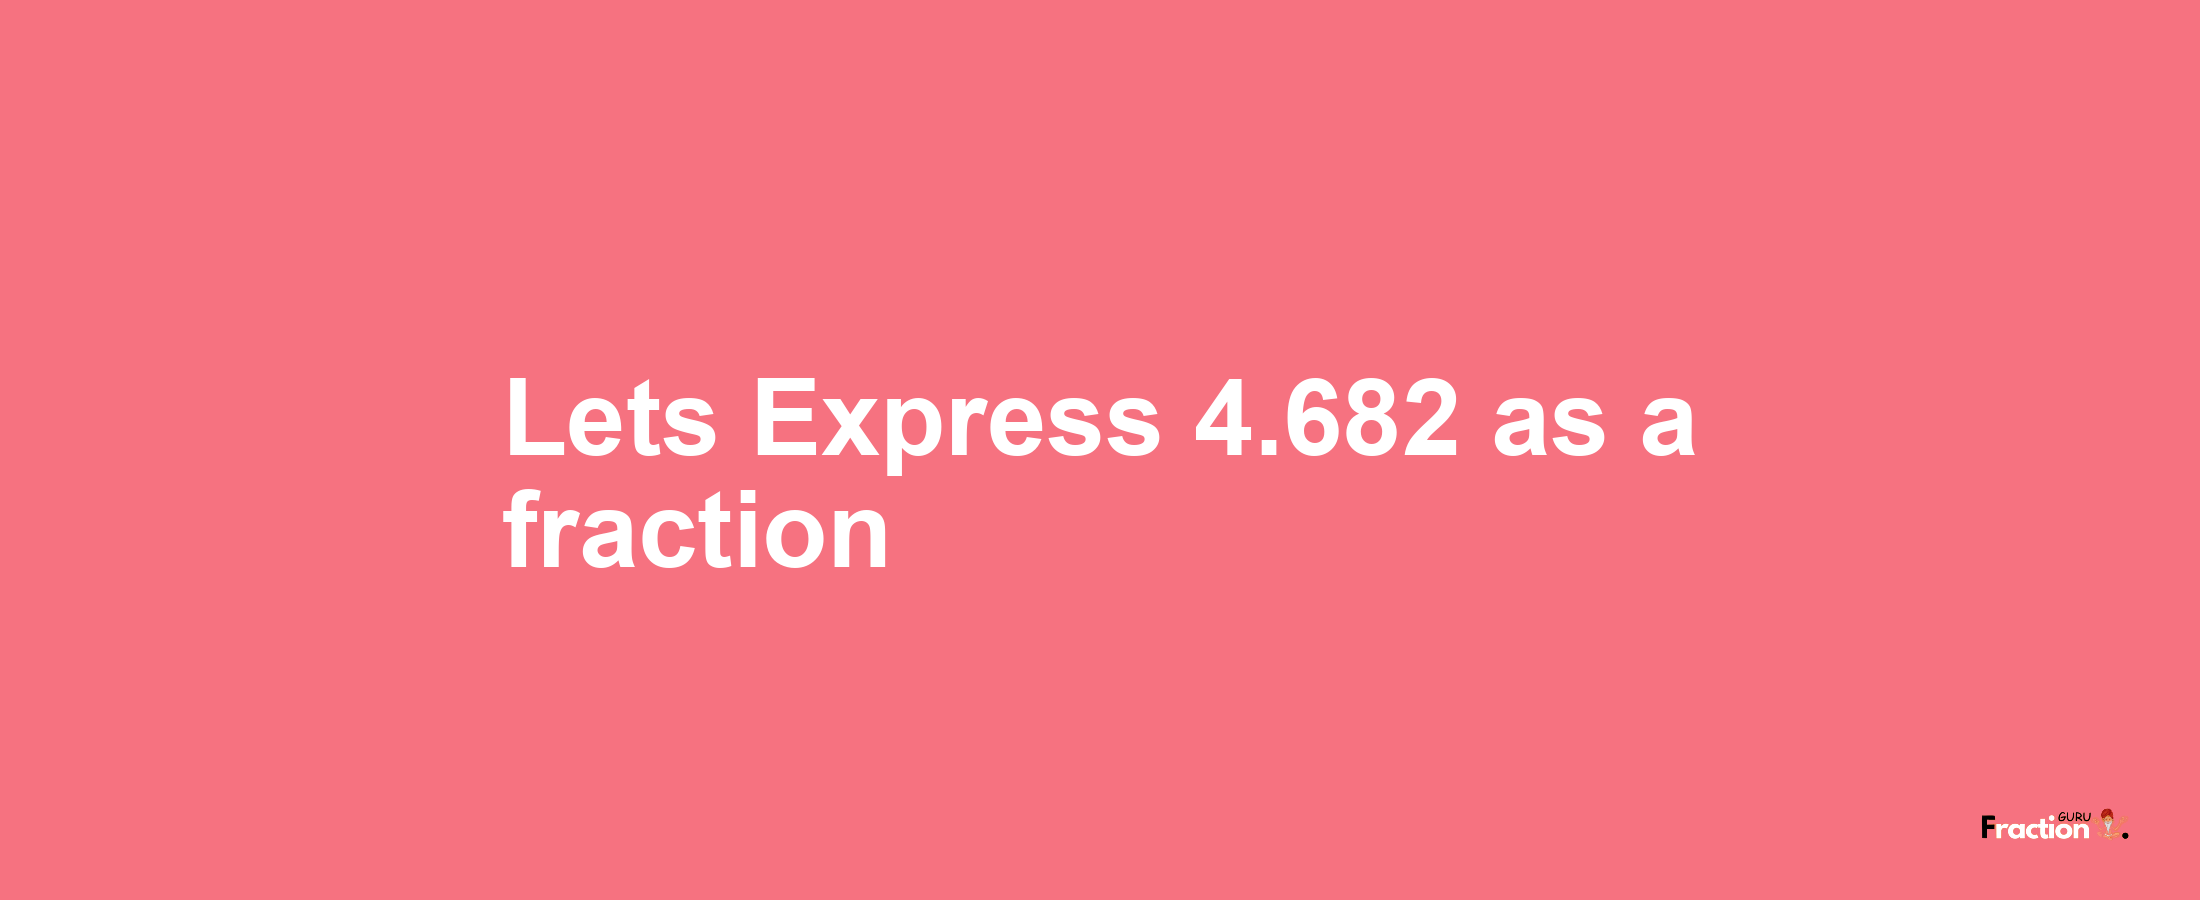 Lets Express 4.682 as afraction